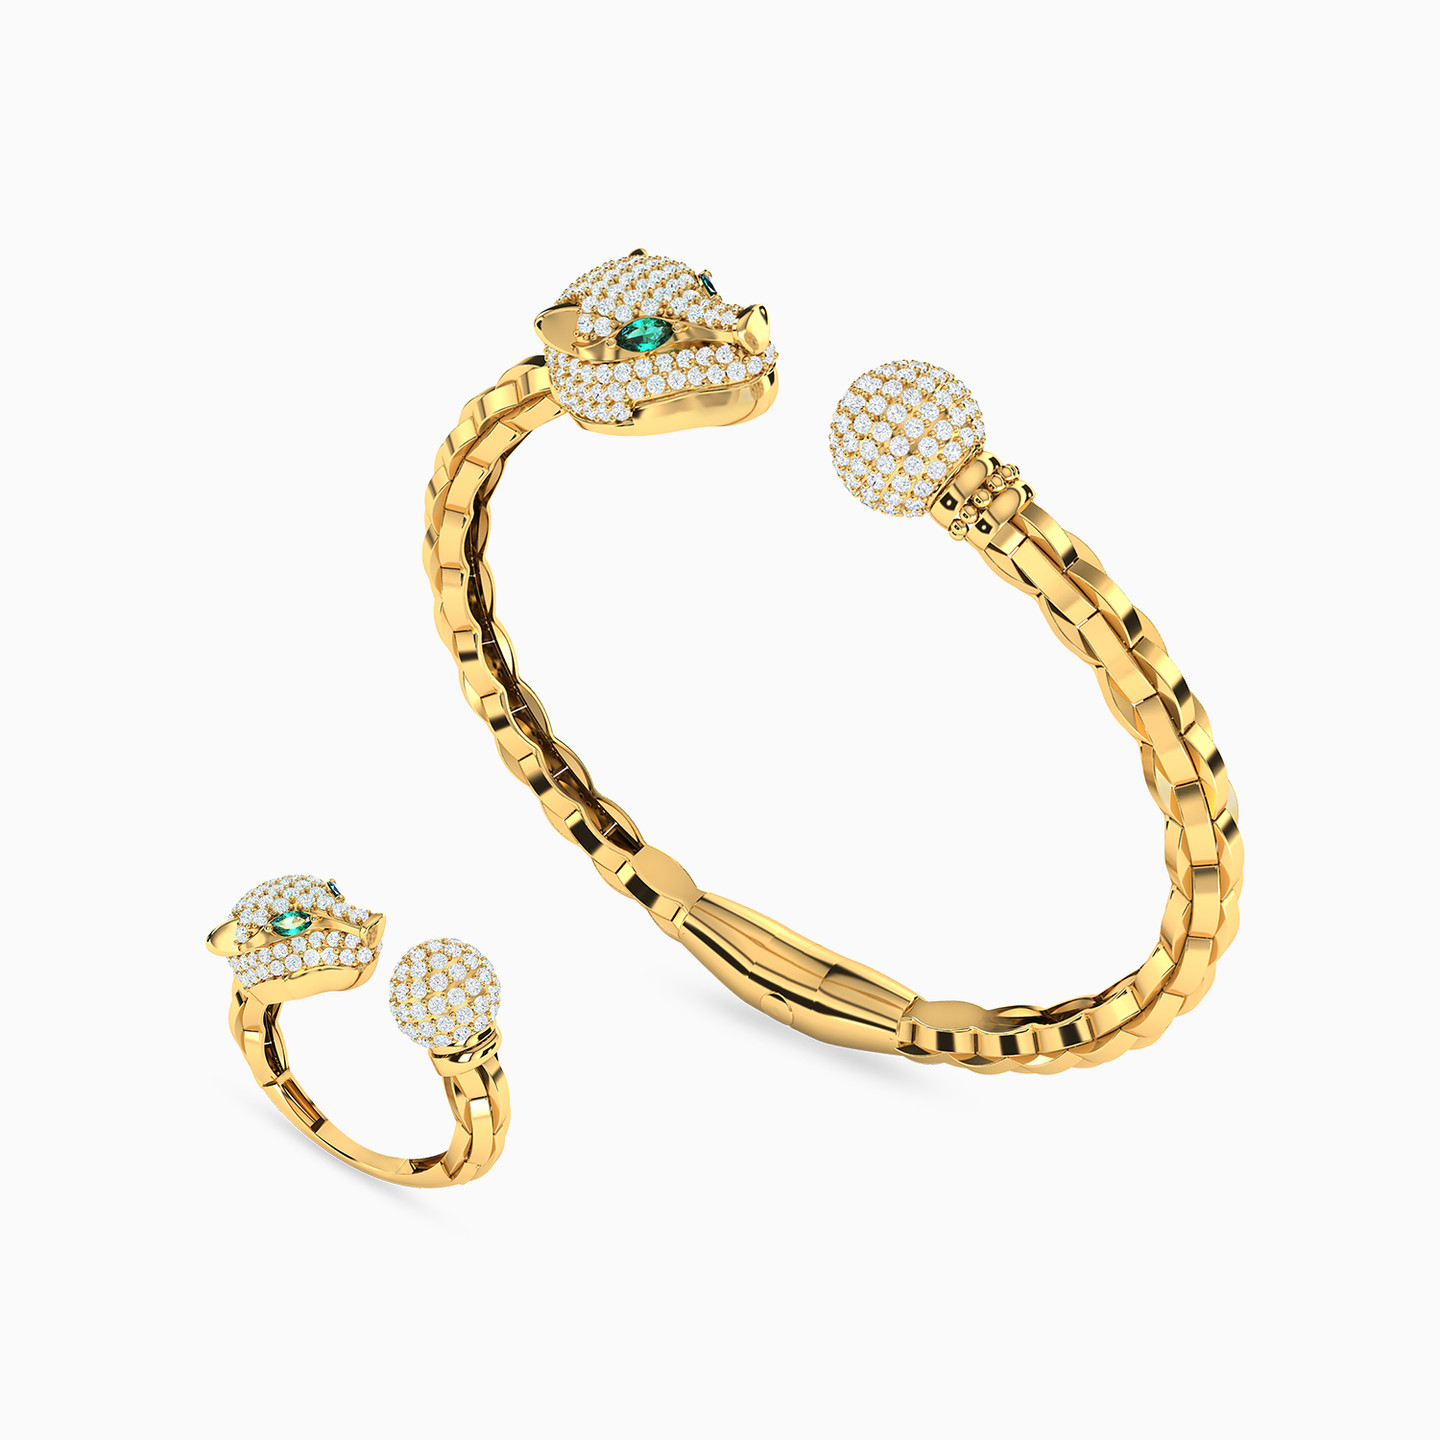 18K Gold Colored Stones Bangle & Ring Jewelry Set - 2 Pieces